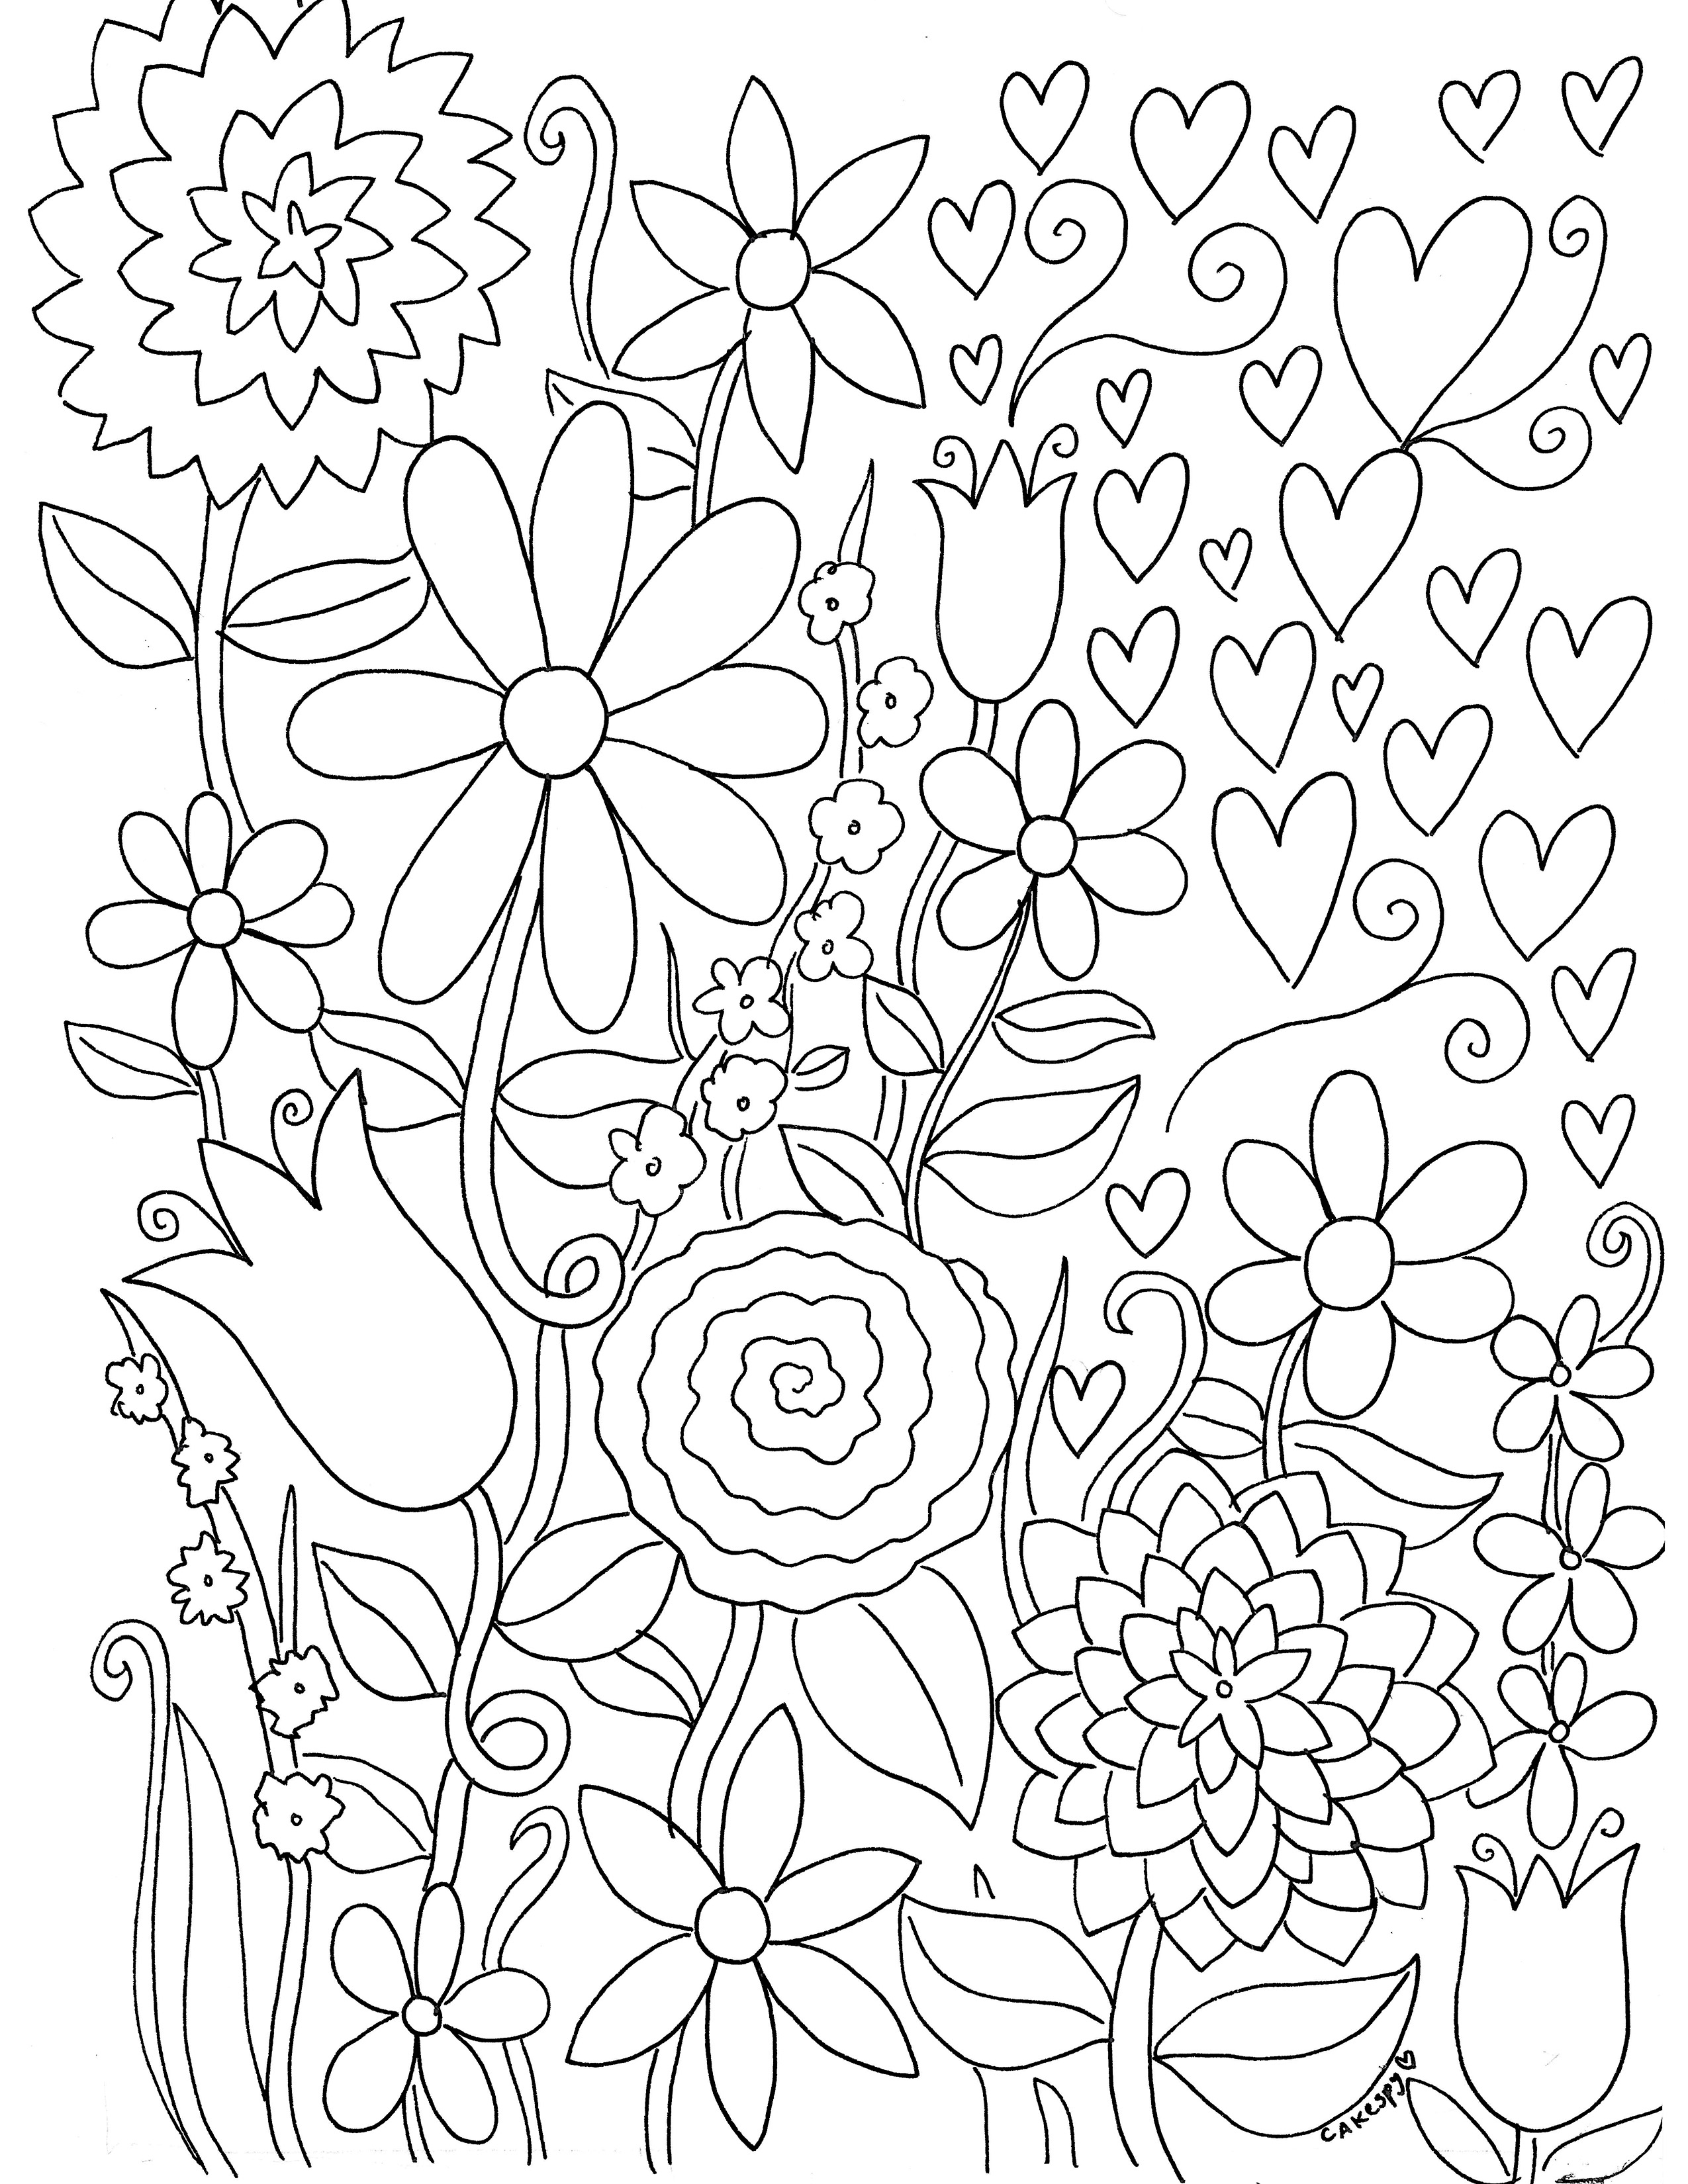 Free Stress Relief Coloring Pages at Free printable colorings pages to print